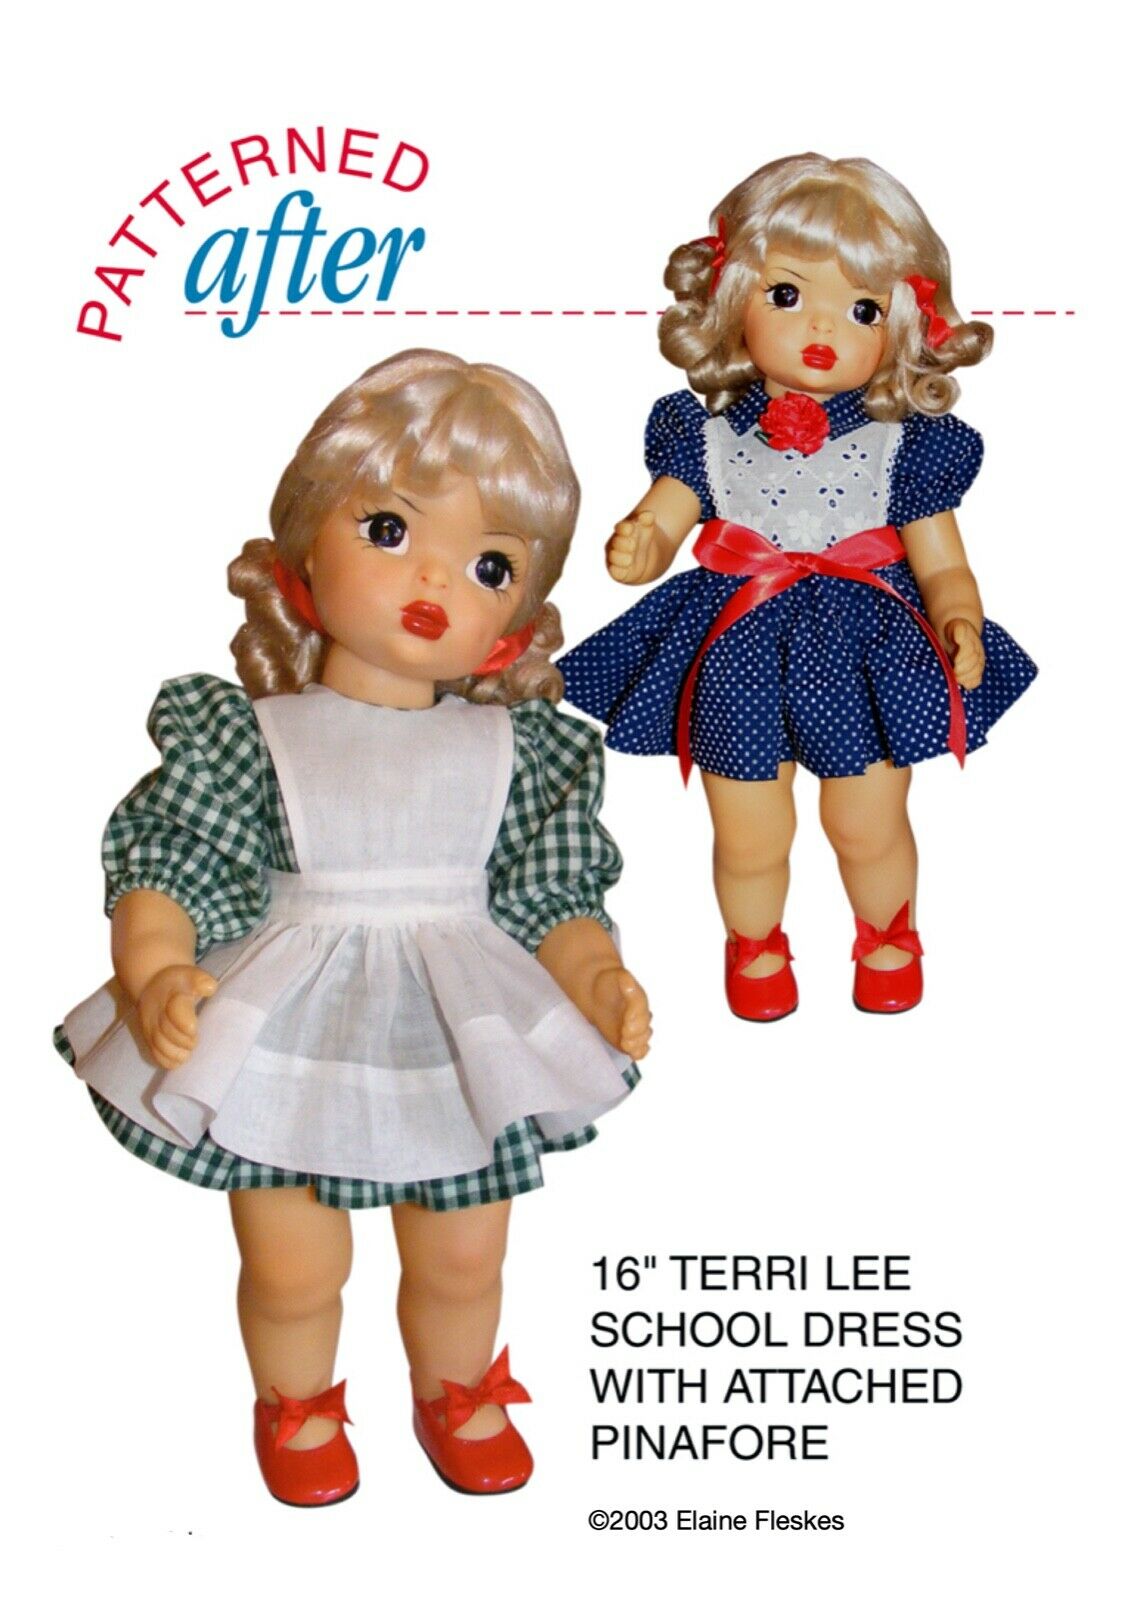 School Dress With Attached Pinafore Clothing Pattern For 16" Terri Lee Doll